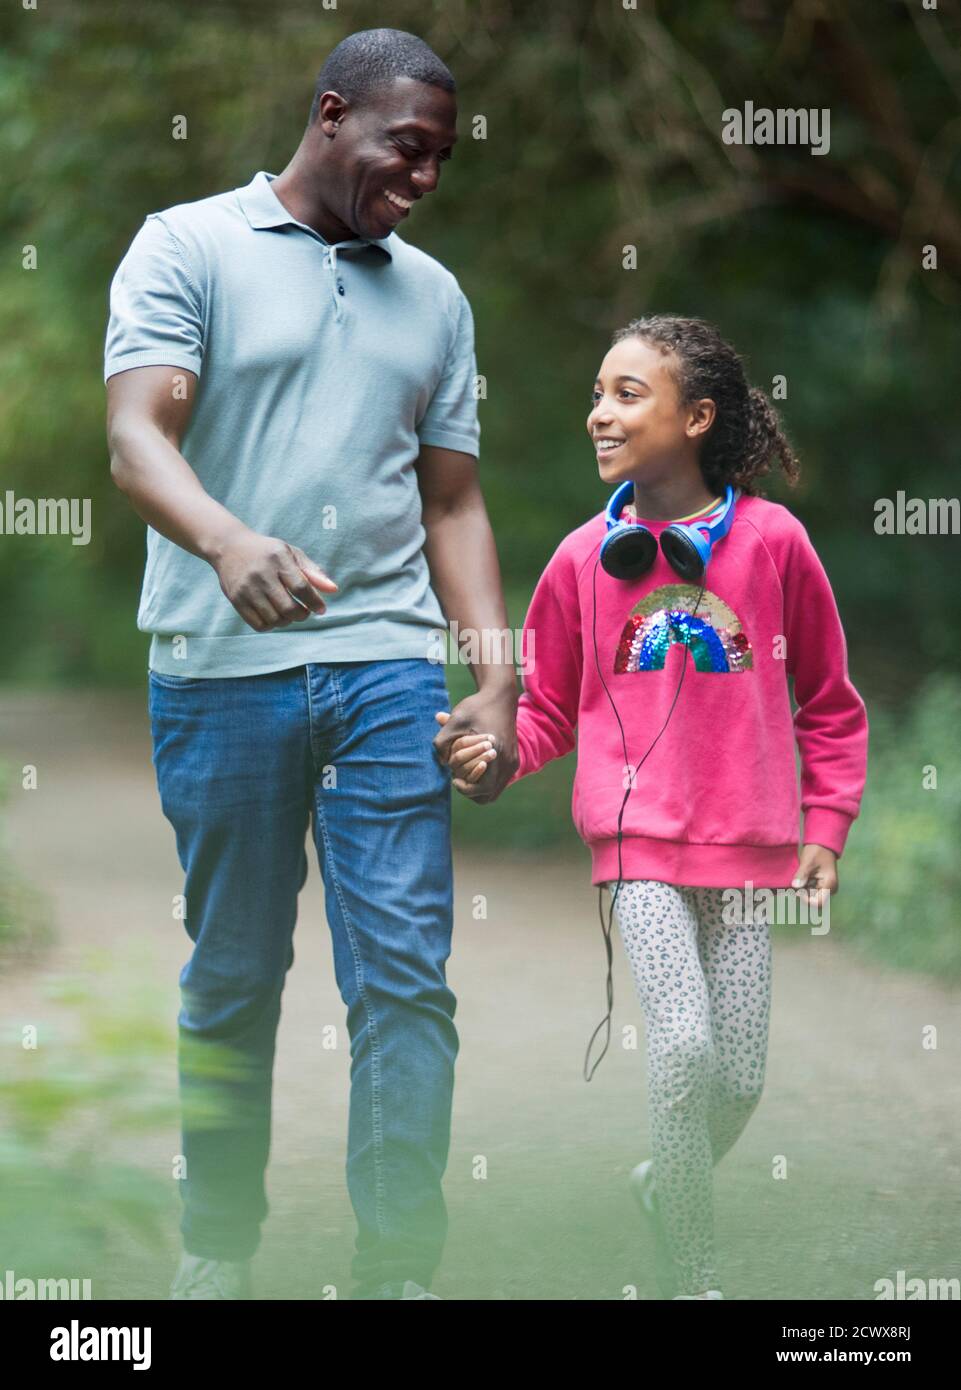 Happy father and daughter holding hands walking on park path Stock Photo